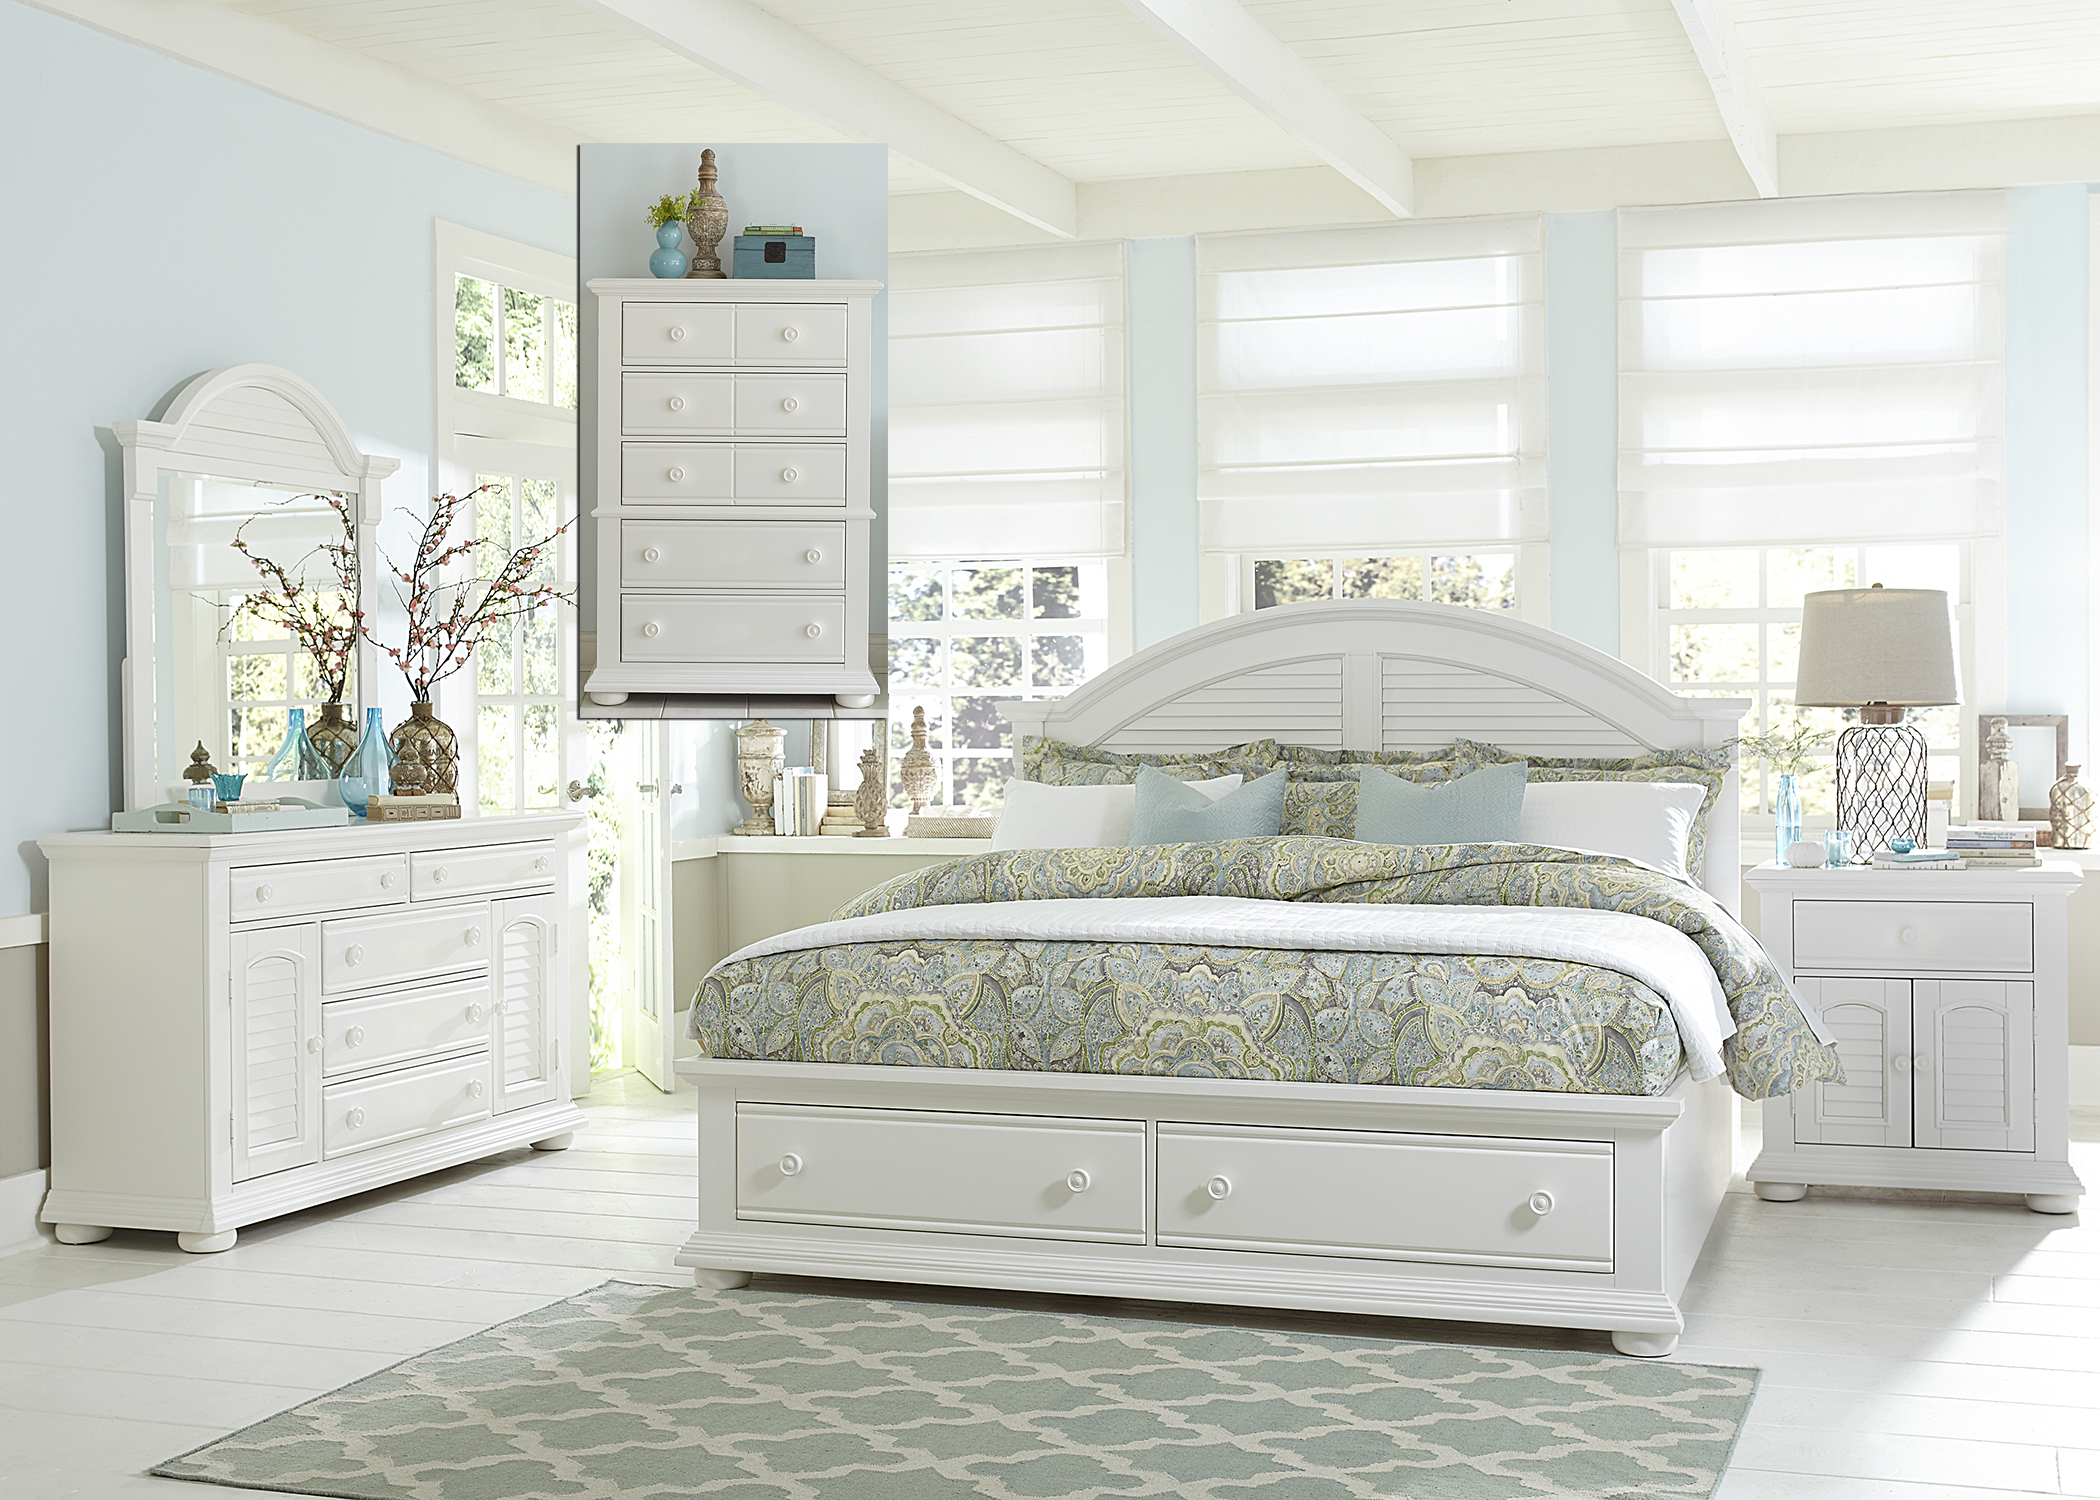 Liberty Furniture Summer House l Bedroom King Storage Bed, Dresser, Mirror, Chest and Night Stand Collection